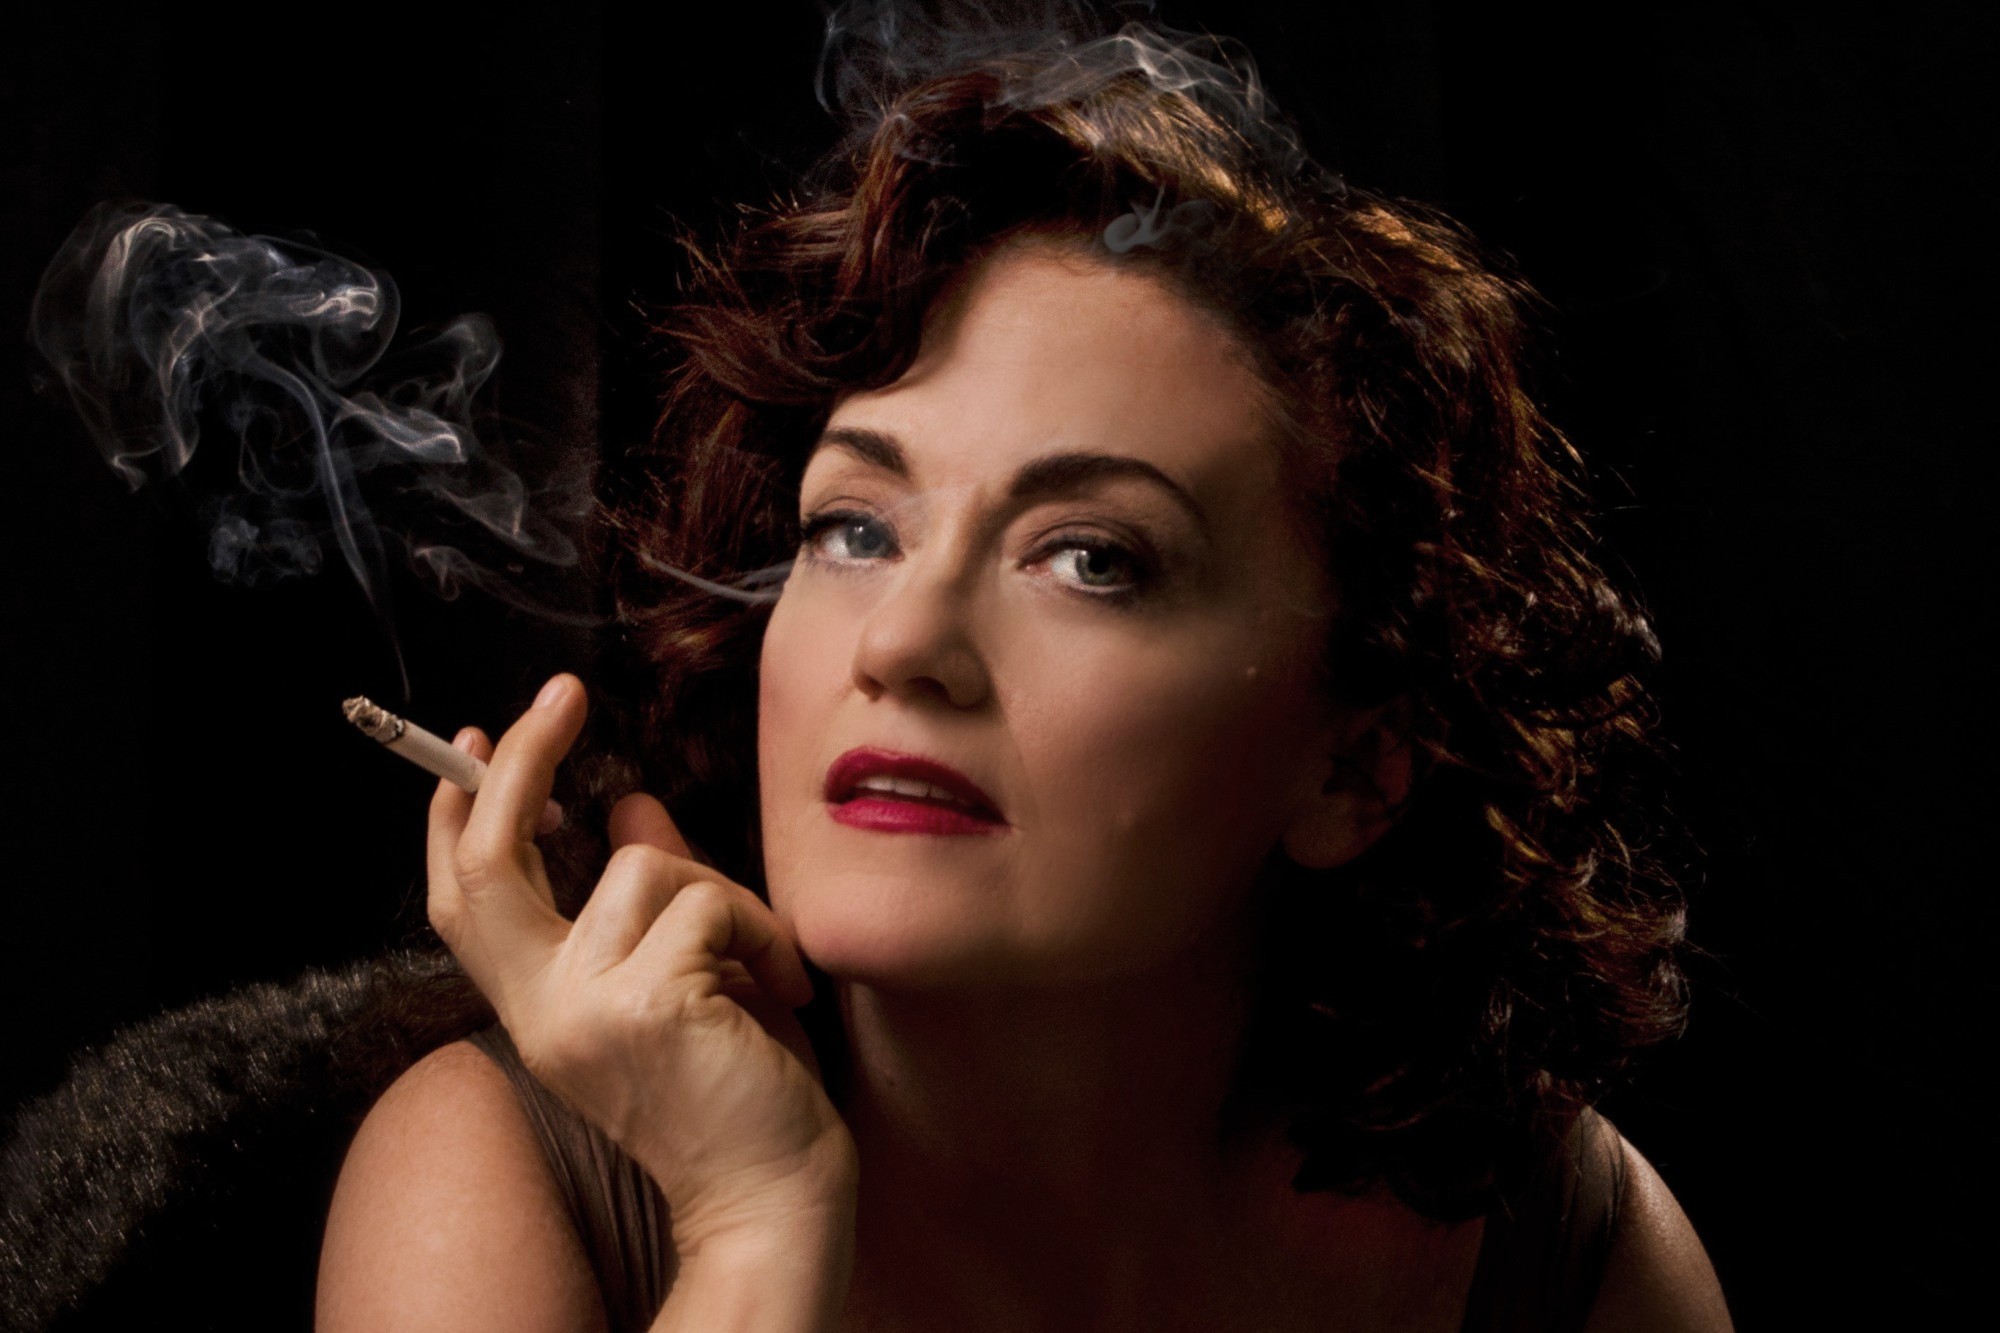 Morgana Shaw Discusses Her Current Role as Hollywood Icon Bette Davis